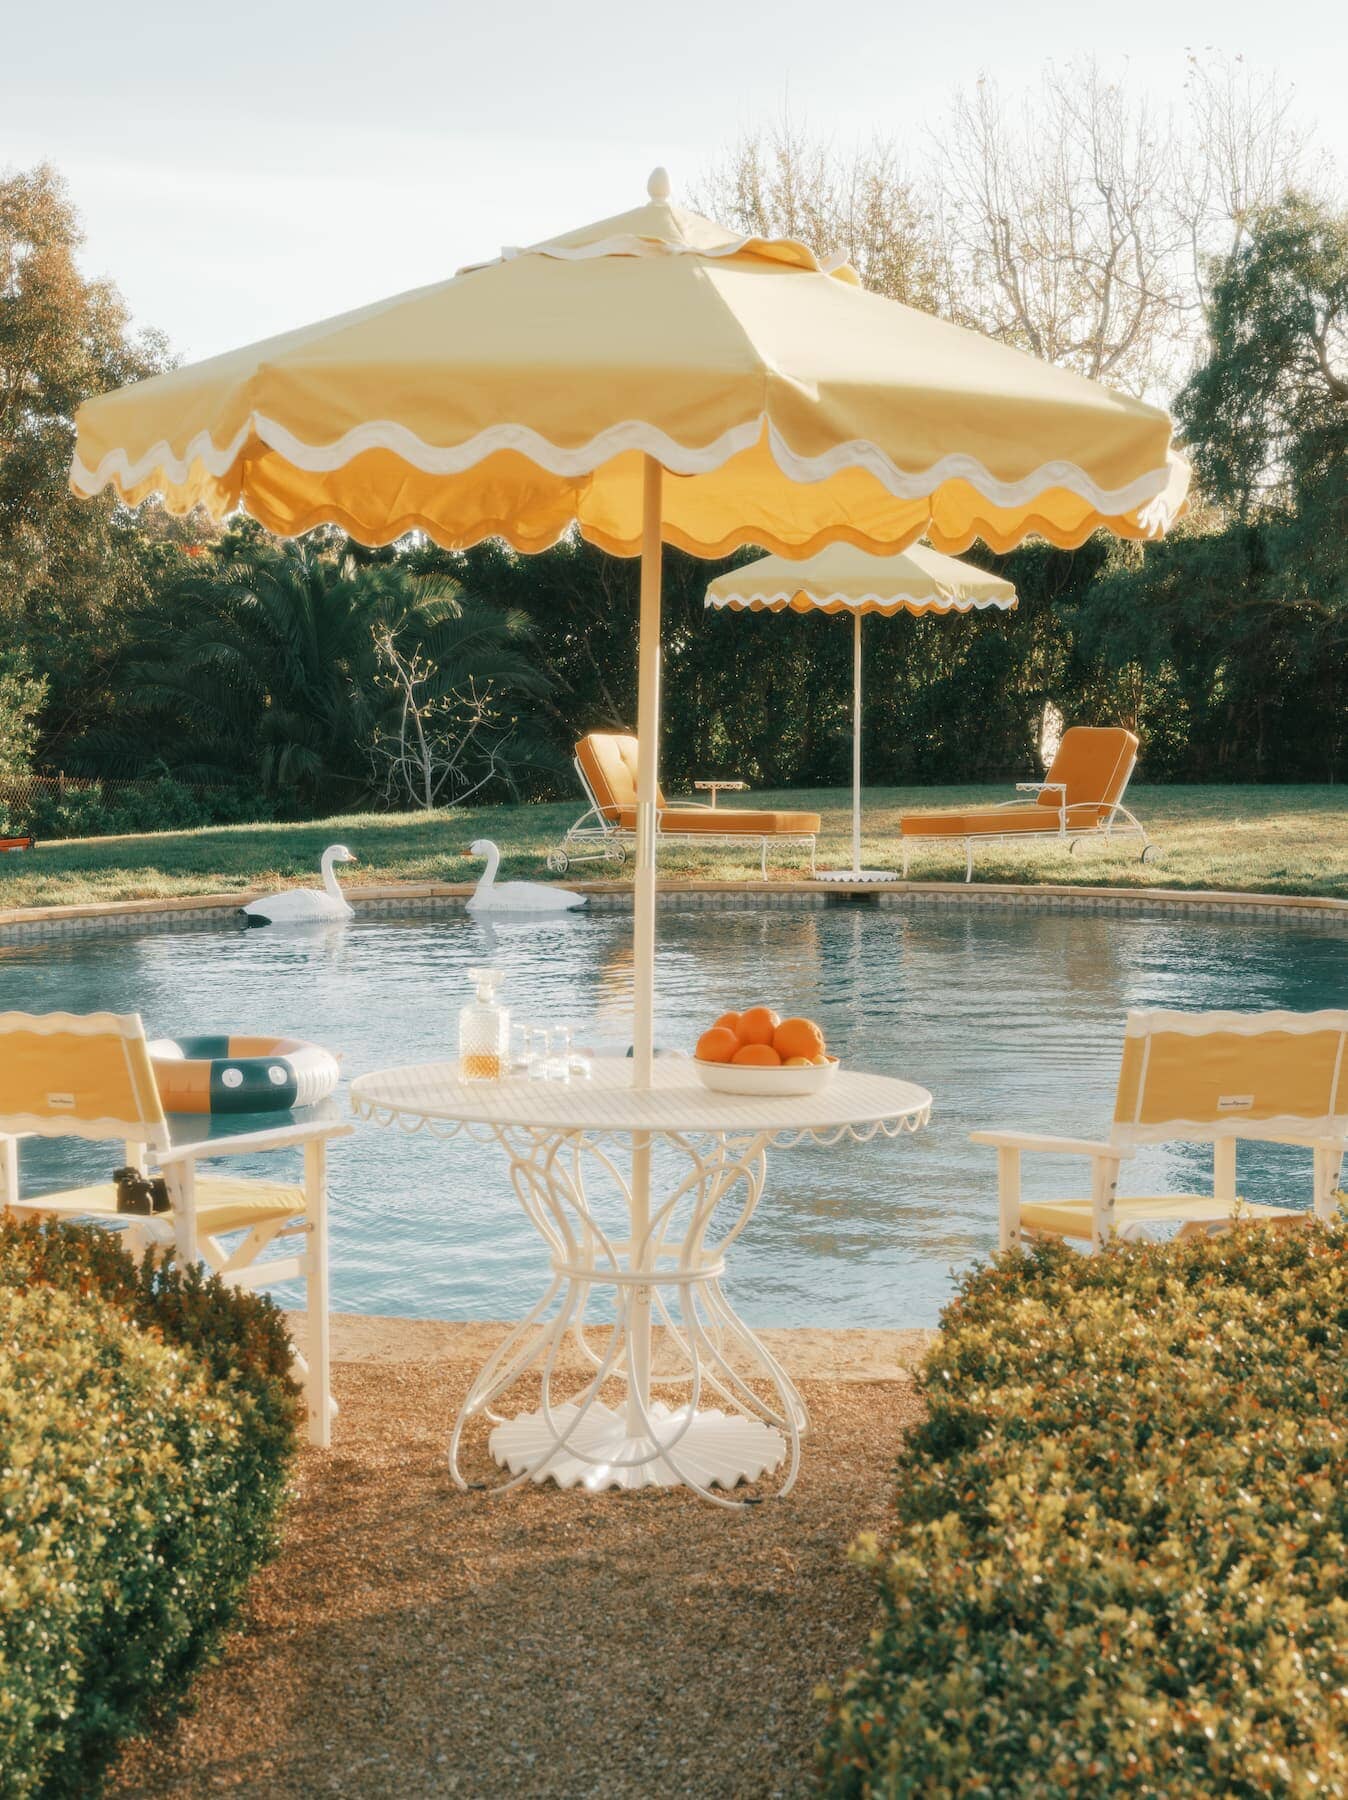 Riviera mimosa chairs, umbrellas and tables next to a pool